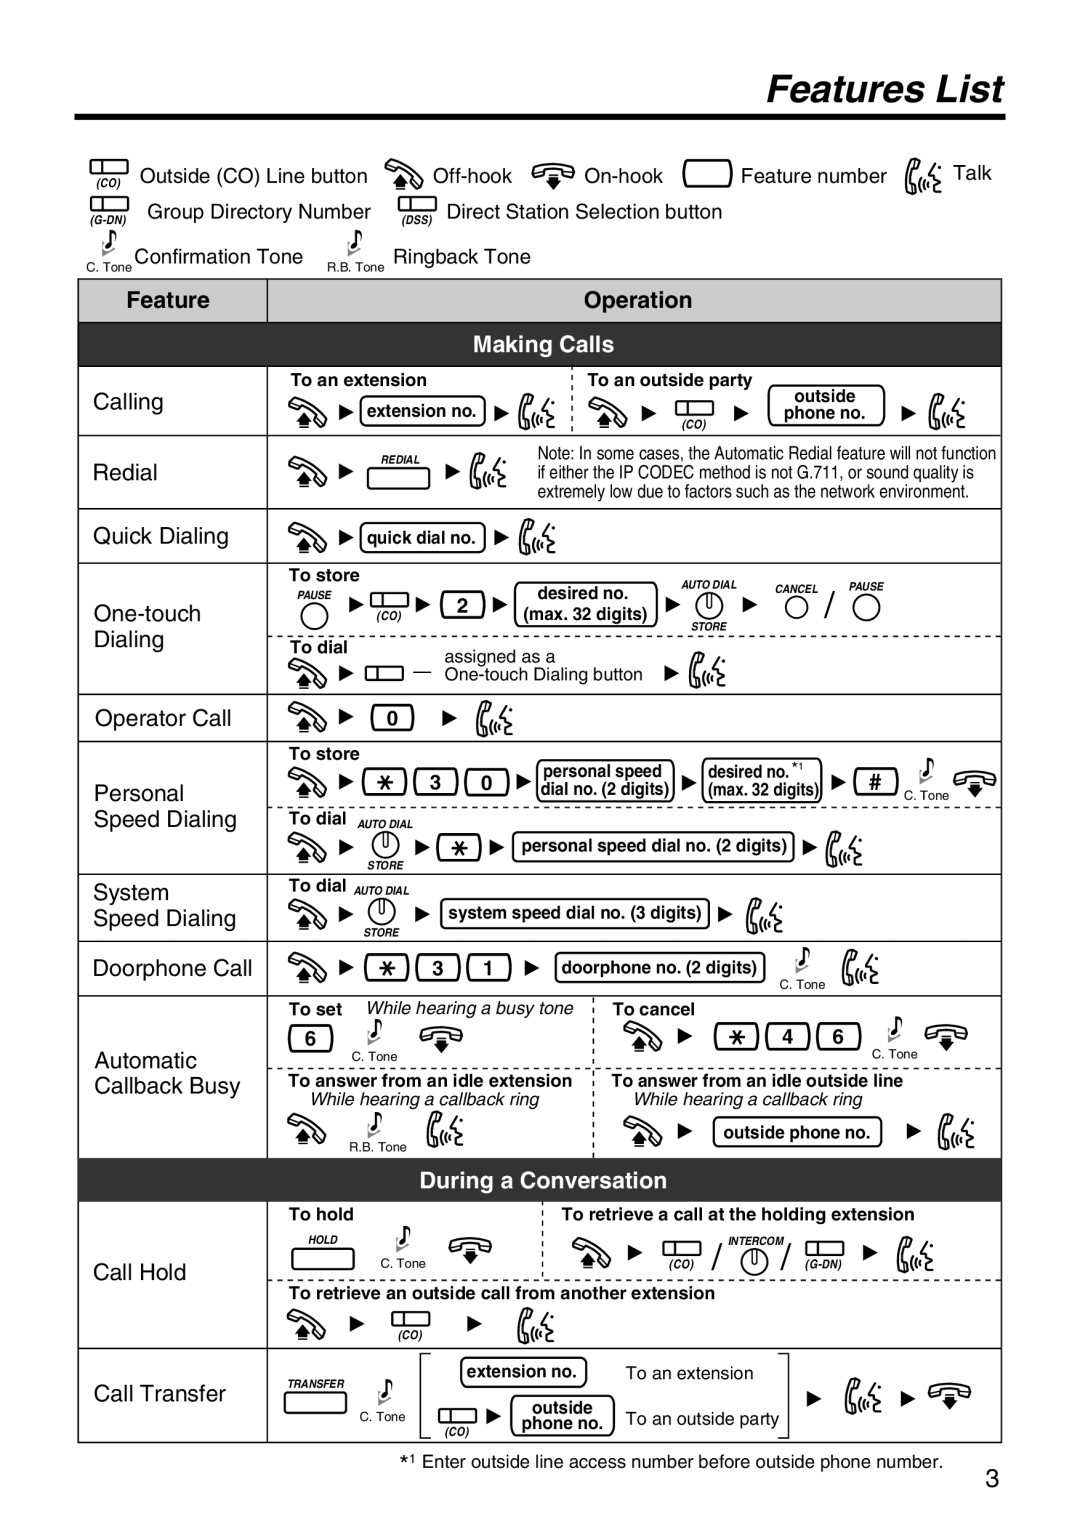 Panasonic KX-NT136 manual Features List, Operation, Making Calls, Calling, Redial, Quick Dialing, One-touch, Operator Call 